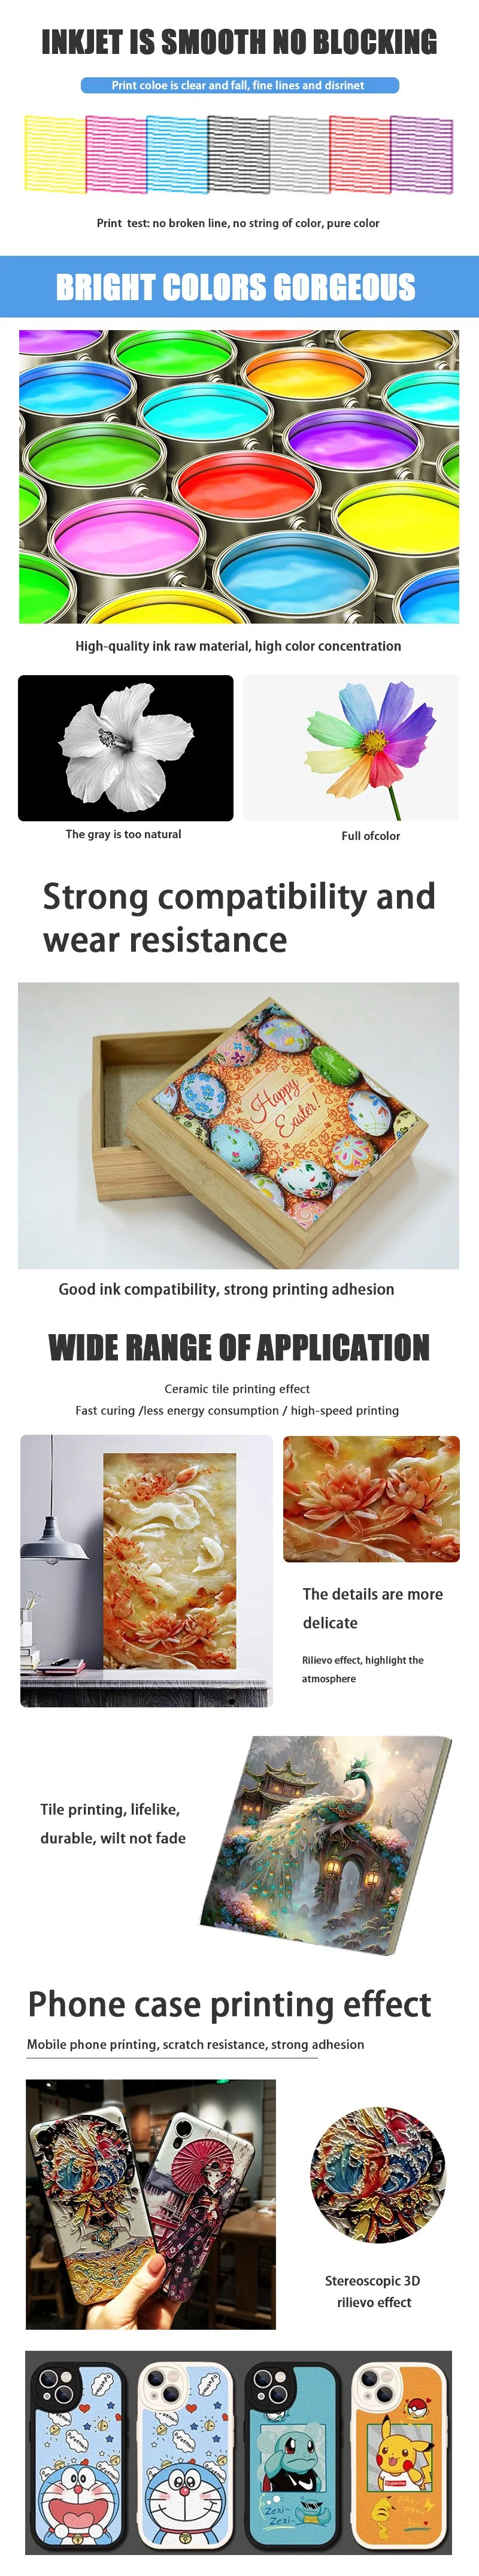 Fast Curing LED UV Curable Ink for Dx5 Dx7 Tx800 XP600 Print Head Wall Printing Machine UV Inkjet Inks